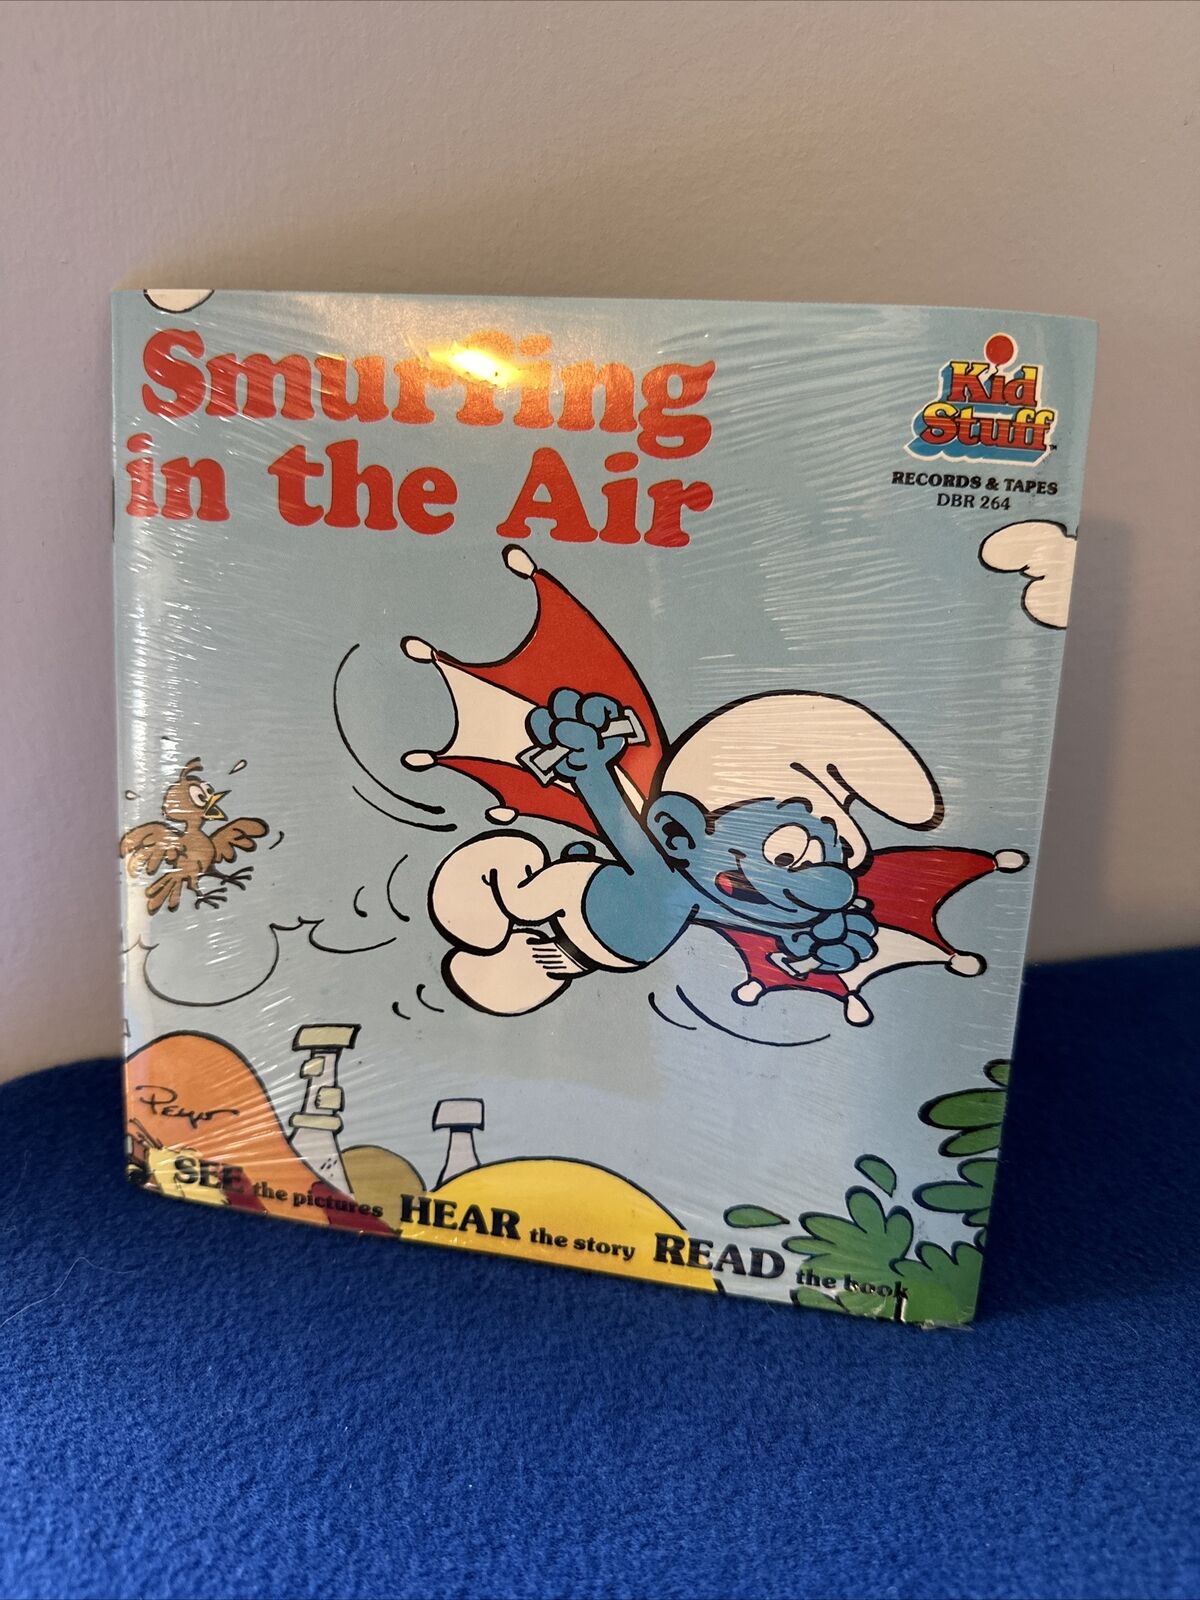 SMURFING IN THE AIR  See Hear Read Book and Vinyl Record  New Sealed DBR-264